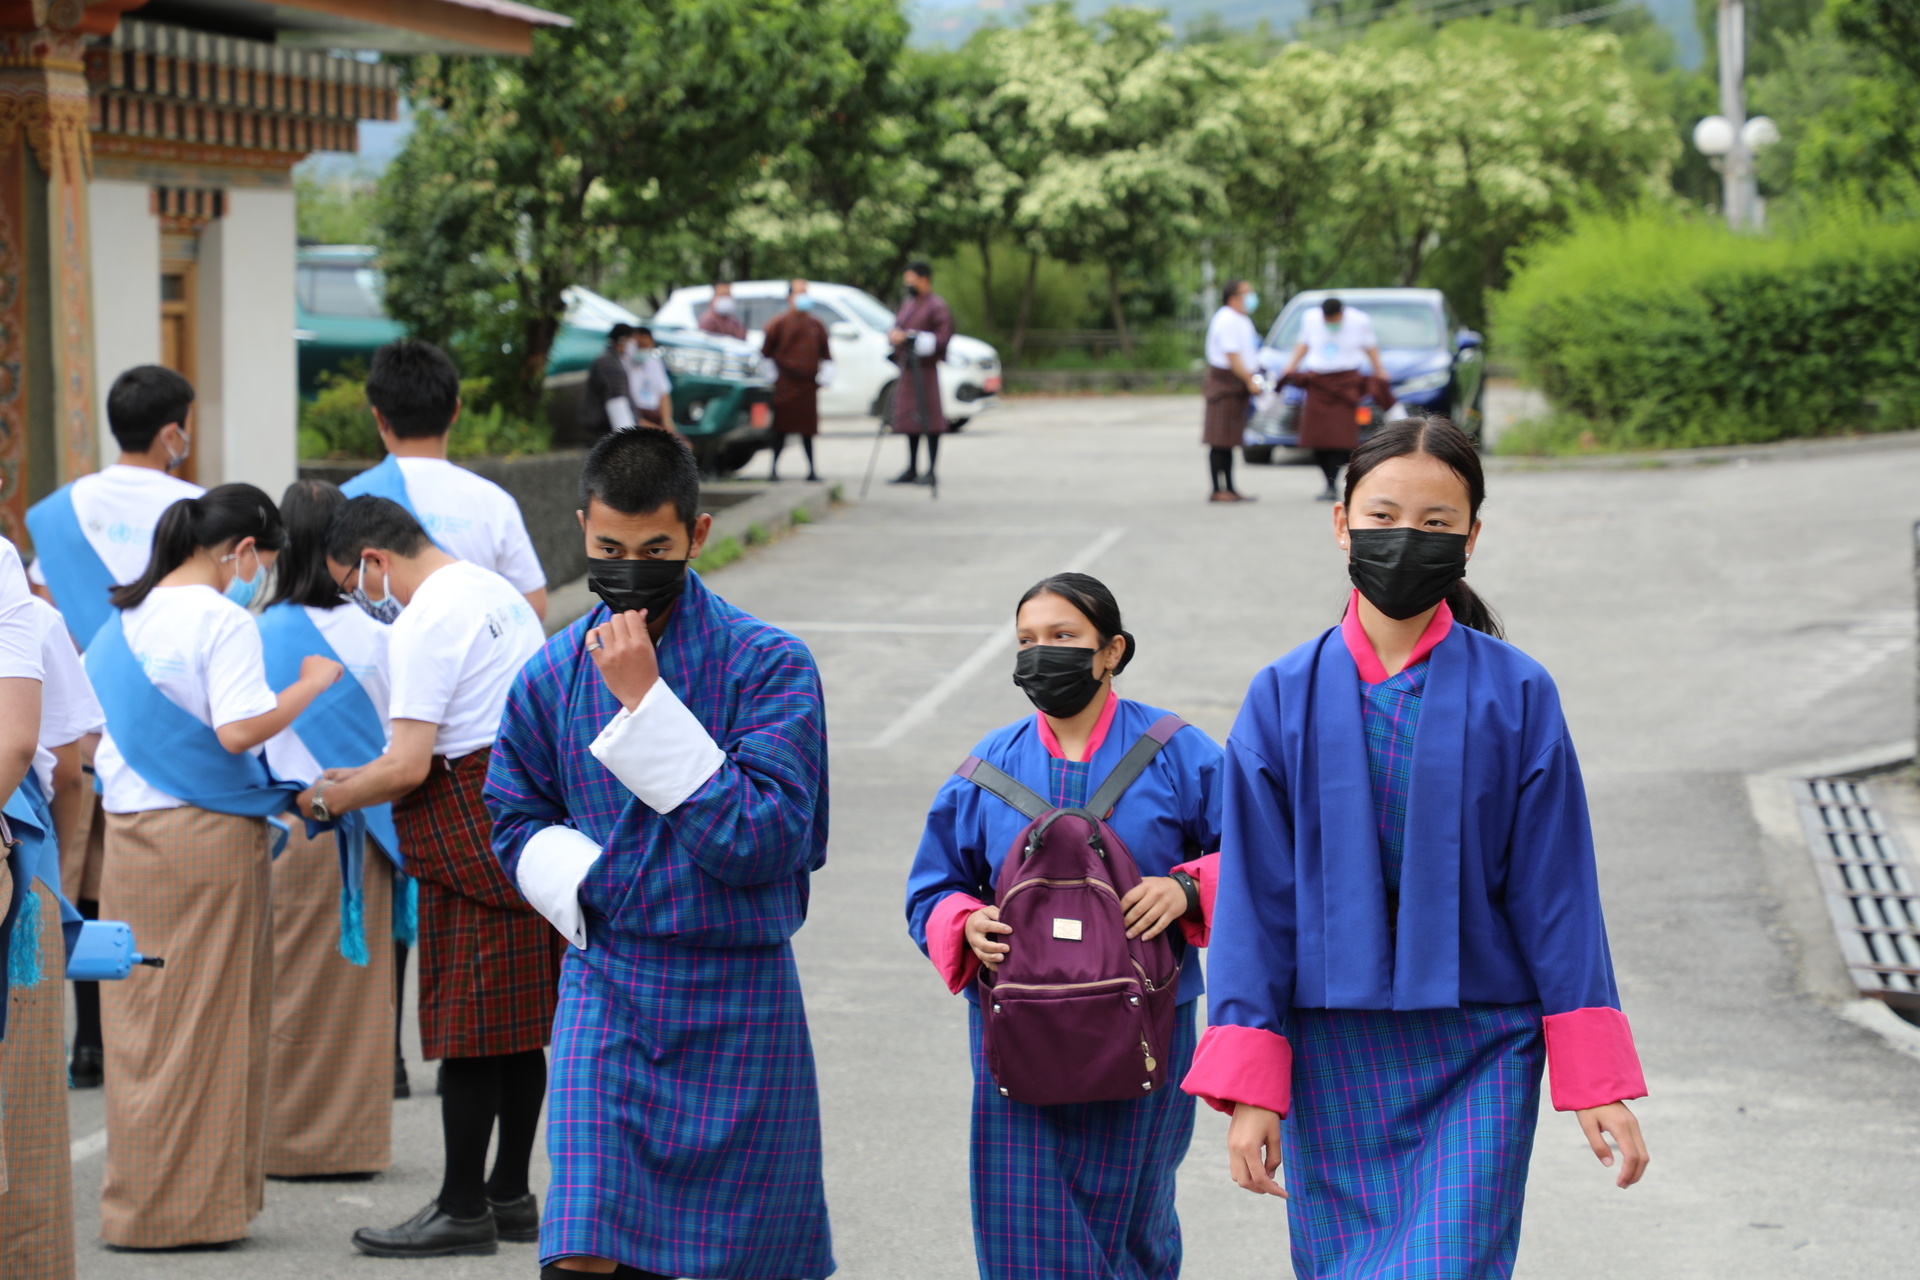 Evolving a people-centred approach to noncommunicable disease (NCD) services in Bhutan